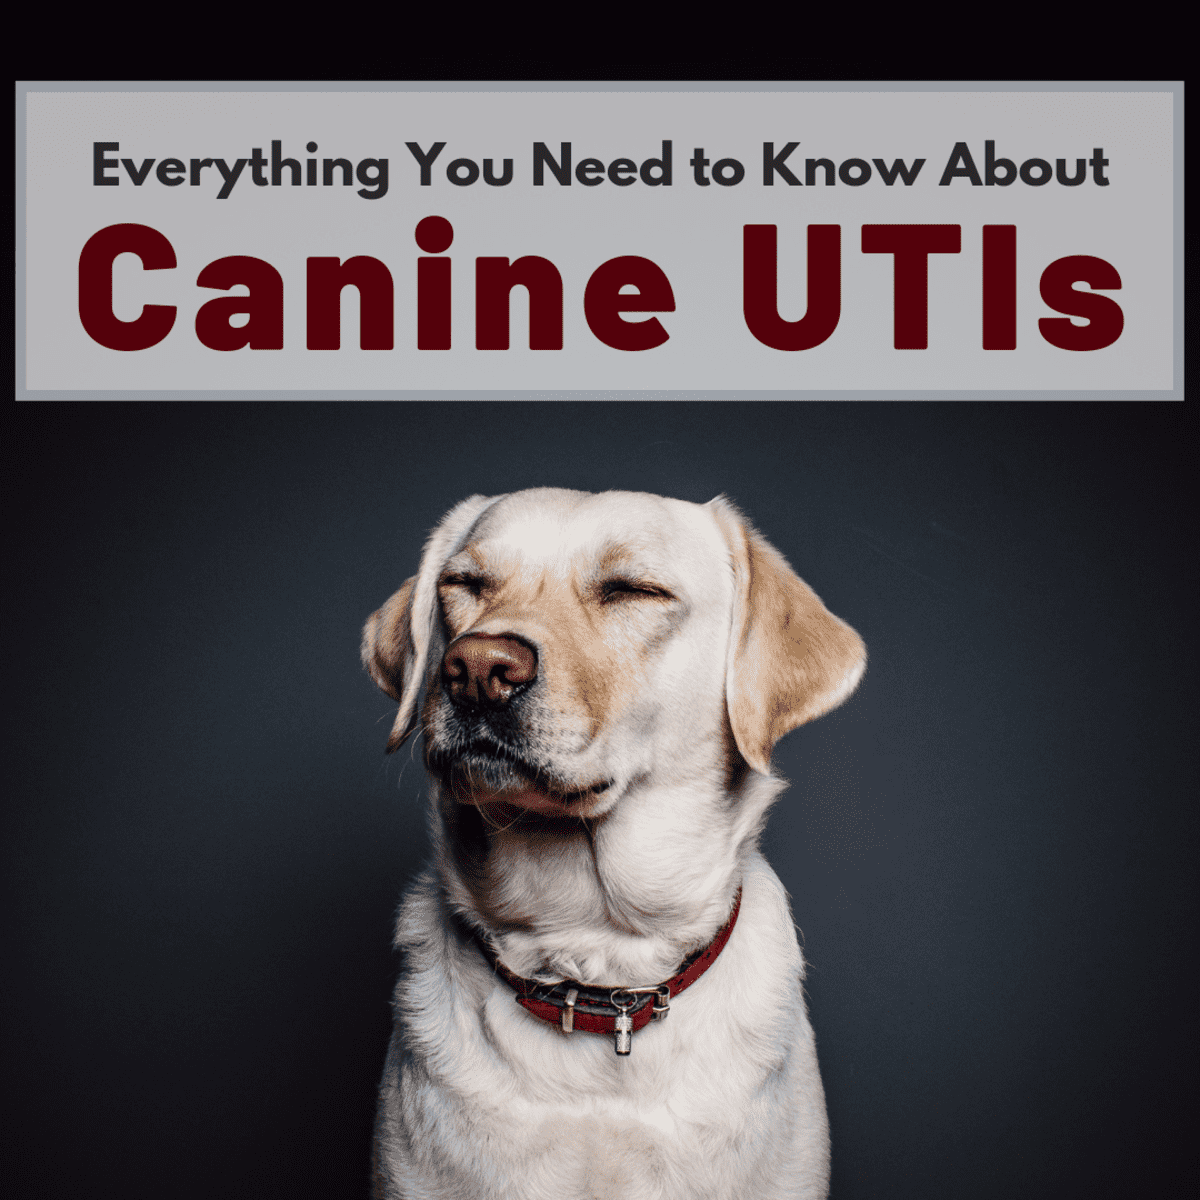 what causes urine infections in dogs